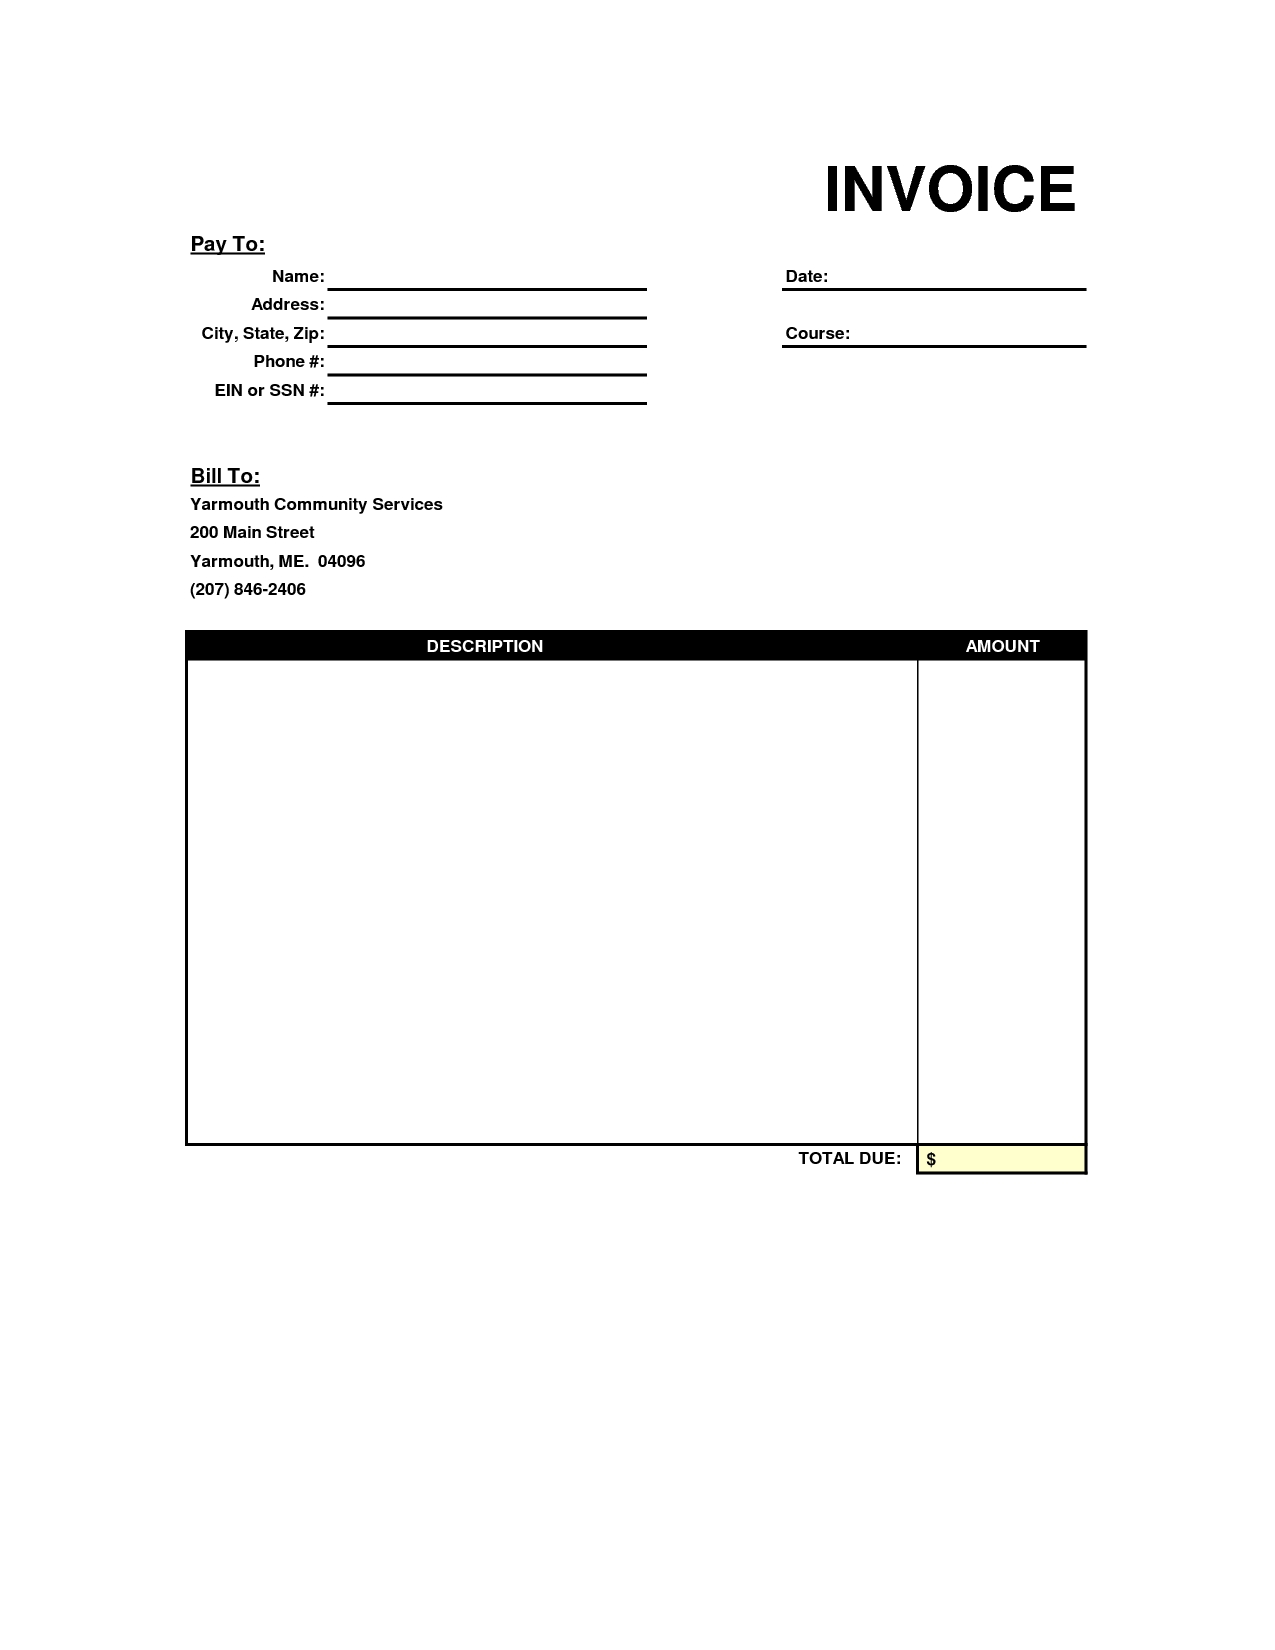 basic invoice format business receipt templates catering invoice sample free catering 1275 X 1650